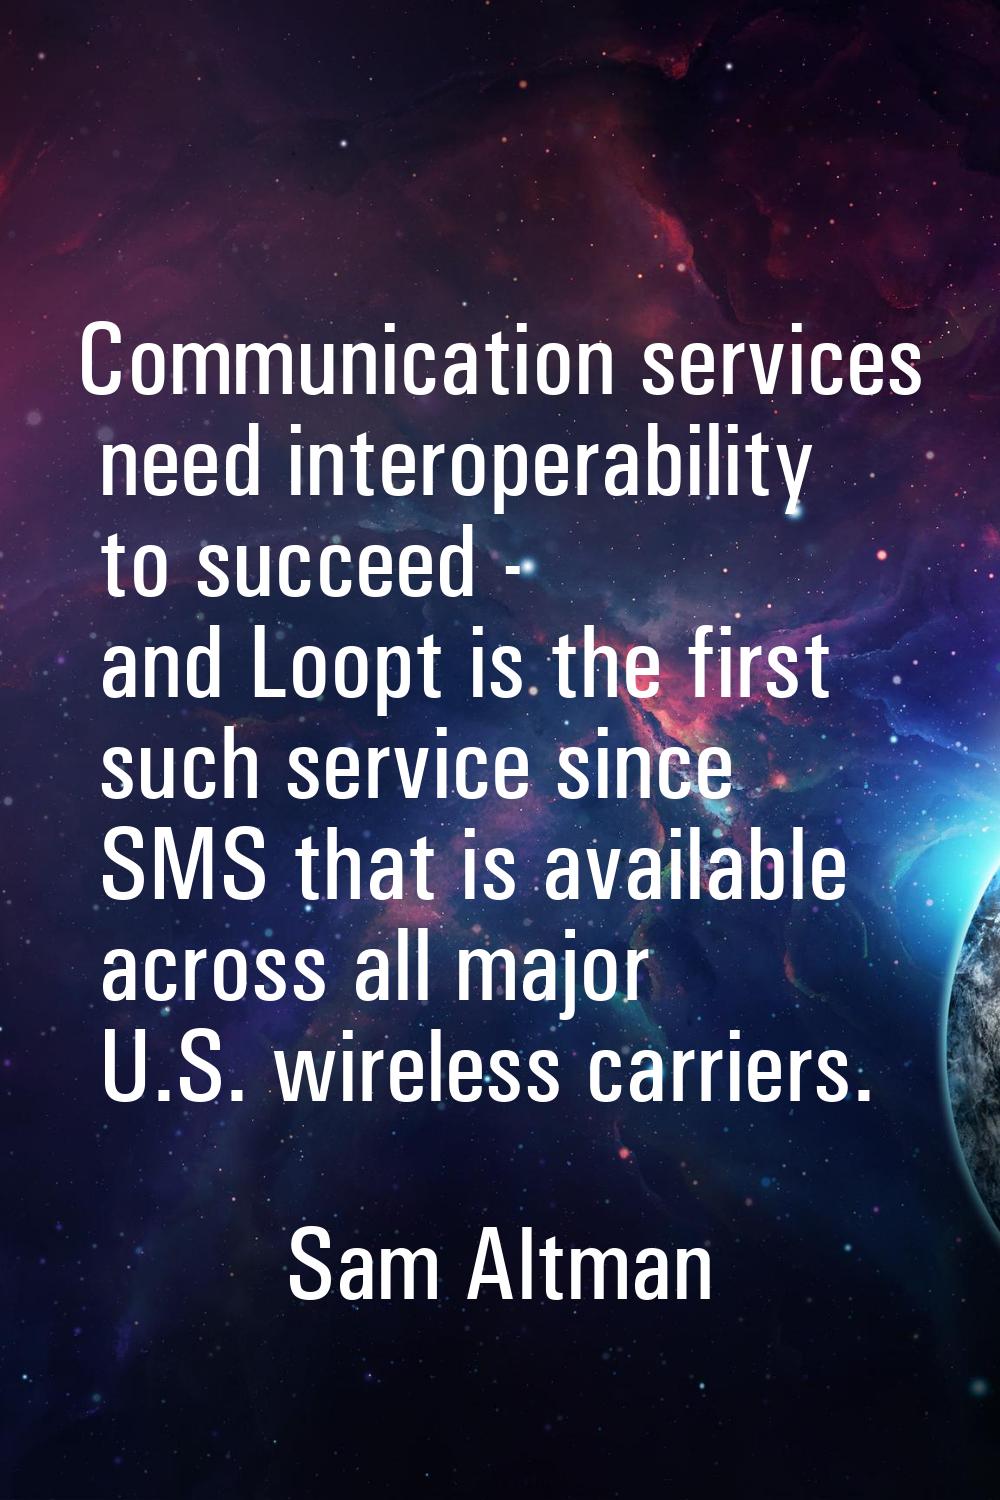 Communication services need interoperability to succeed - and Loopt is the first such service since